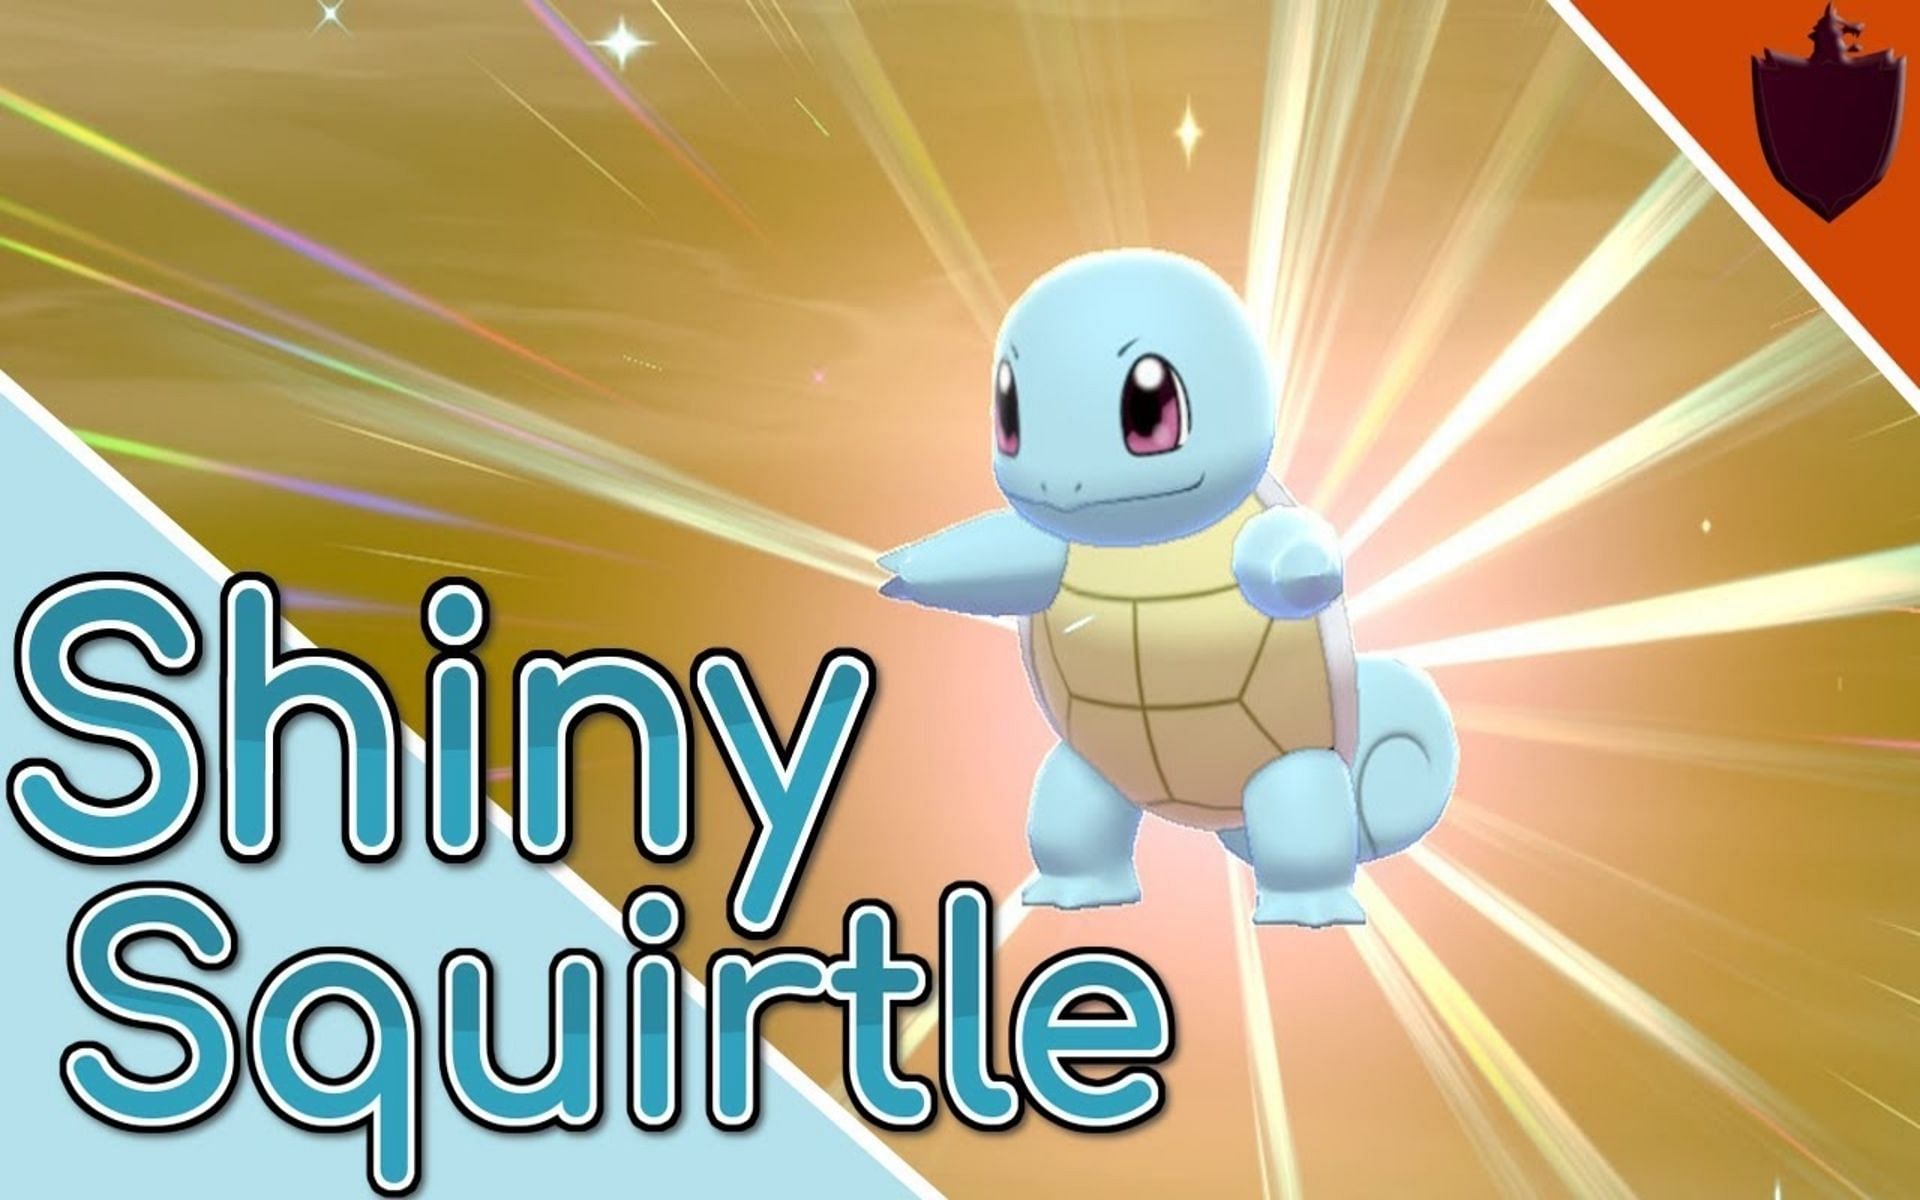 Pokemon Yellow: How To Catch Squirtle